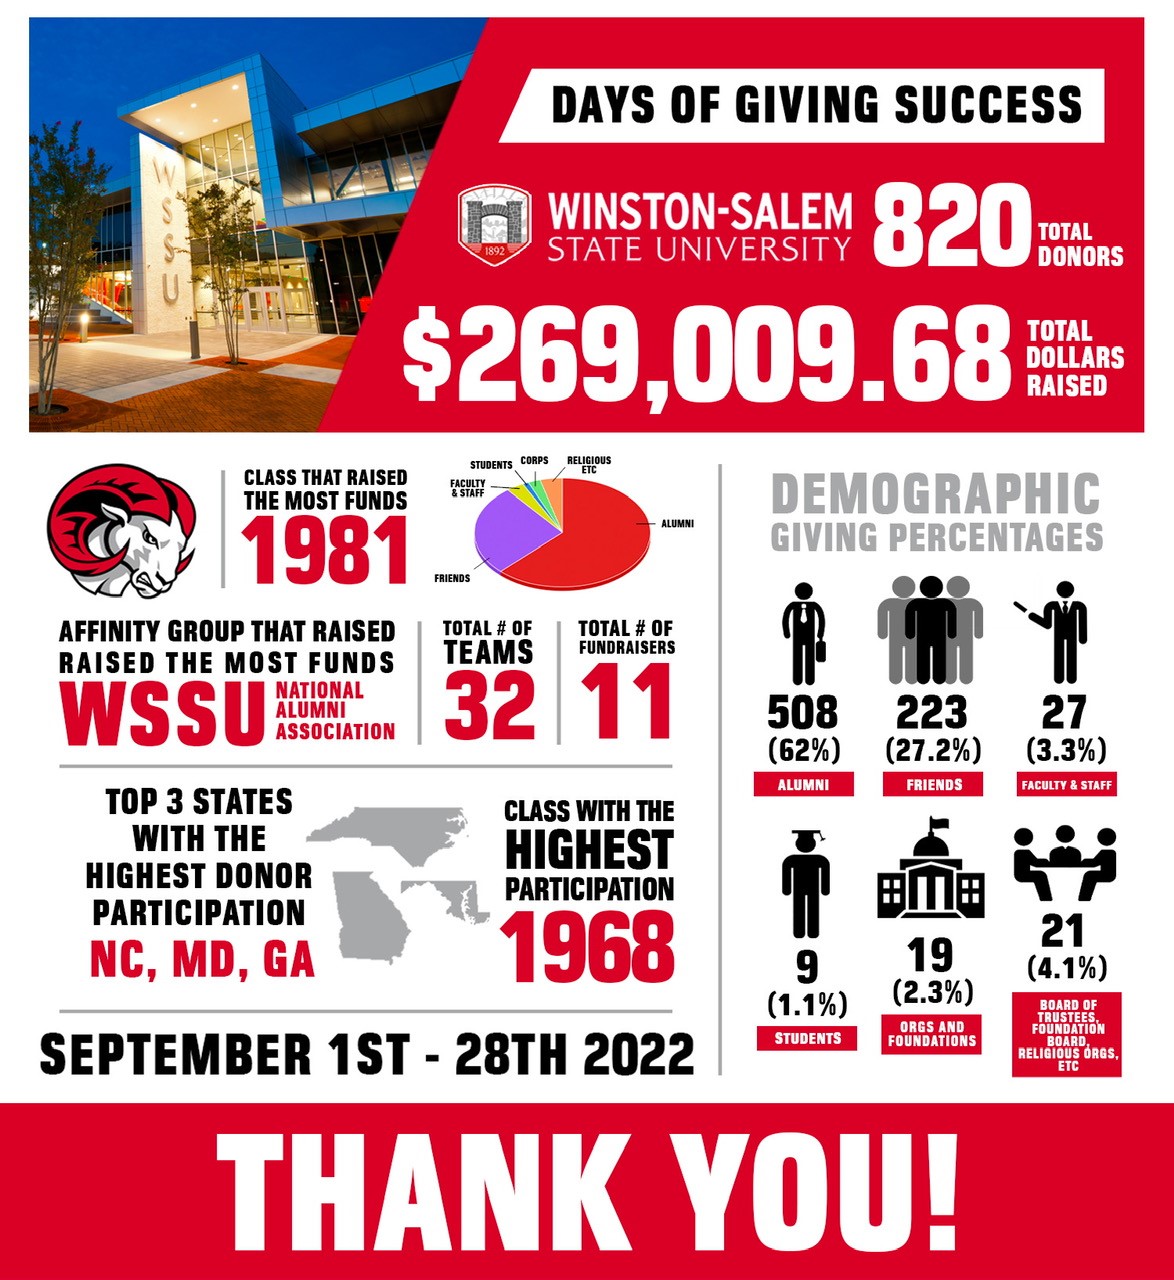 Days of Giving Success, Winston-Salem State University 820 Total Donors, $269,009.68 Total Dollars Raised. Class that raised the most funds: 1981. Affinity Group that raised the most funds WSSU National Alumni Association. Total number of teams: 32. Total number of Fundraisers:11. Top 3 states with the highest donor participation: NC, MD, GA. Class with the highest participation: 1968. September 1st through 28th 2022. Demographic giving percentages: 508 (62%) Alumni, 223 (27.2%) Friends, 27 (3.3%) Faculty and Staff, 9 (1.1%) Students, 19 (2.3%) Organizations and Foundations, 21 (4.1%)Board of Trustees, Foundation Board, Religious Organizations, etc.